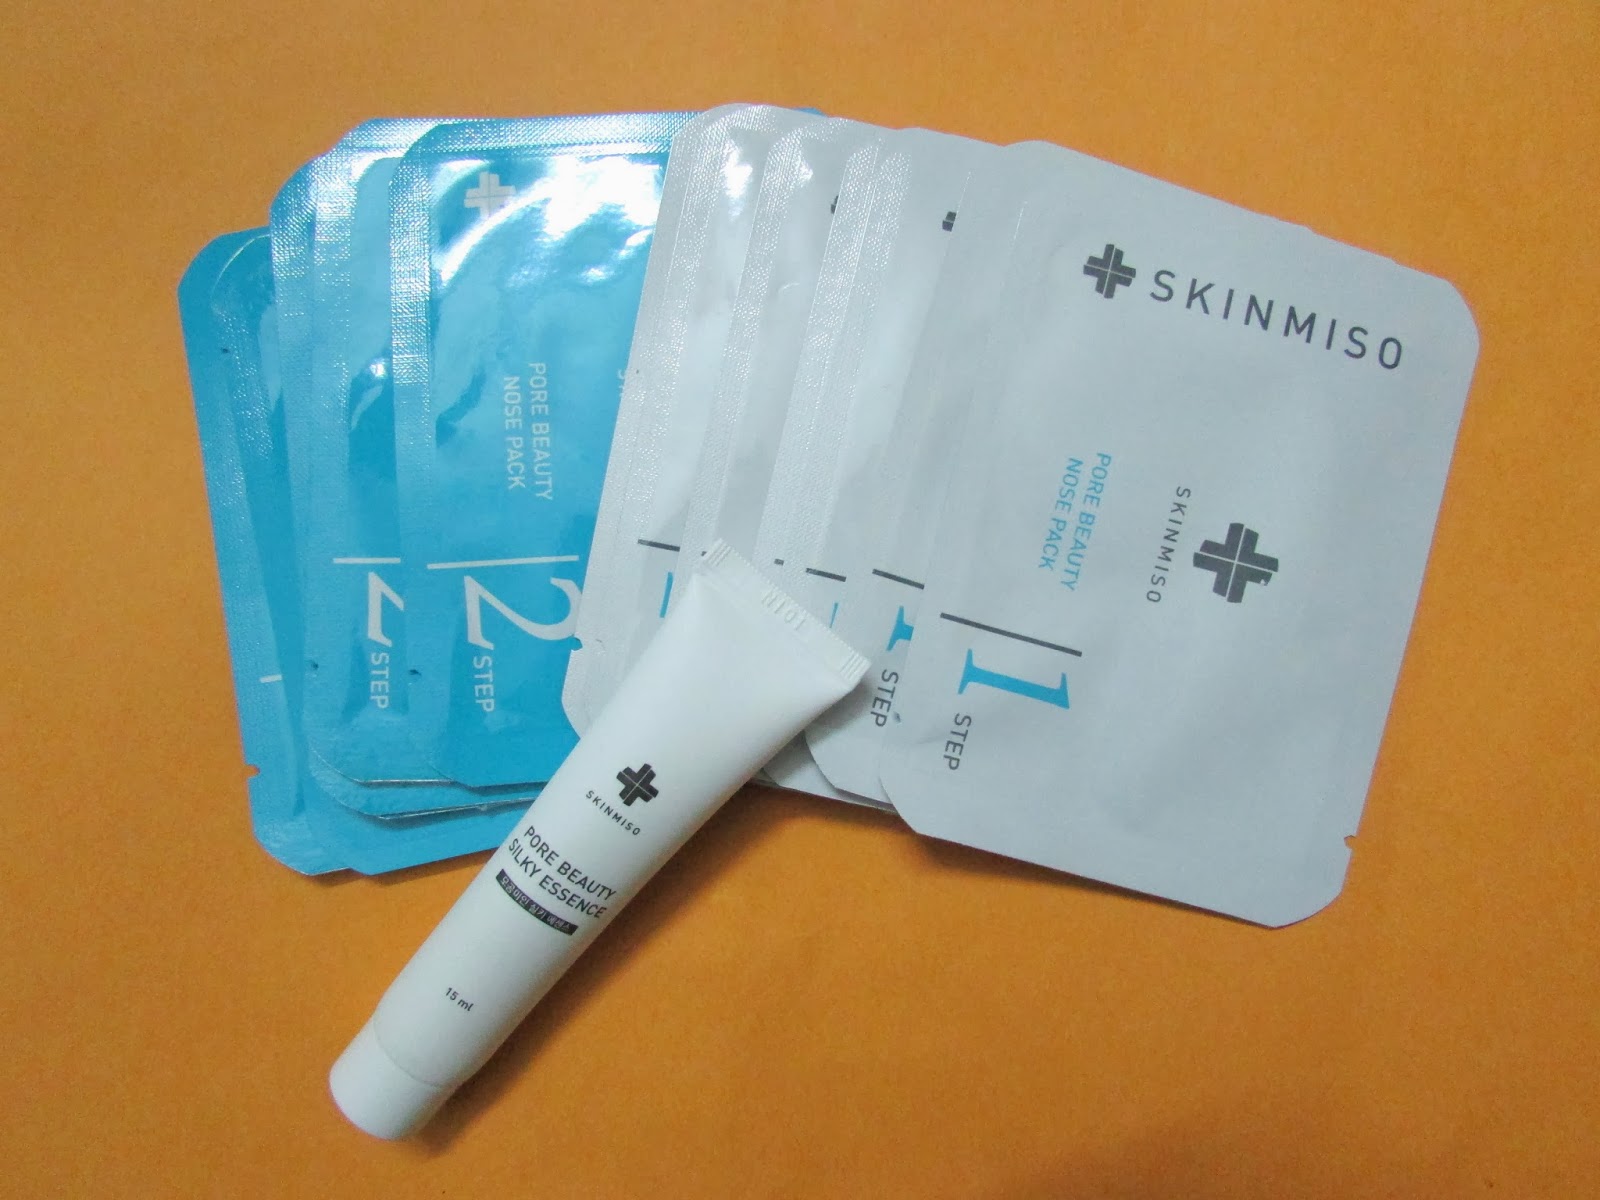 Black heads, white heads, black heads removal, white head removal, black head removal strips, white head removal strips,black head removal scrub, white head removal scrub, get rid of black heads, get rid of white black heads removal, white head removal, black head removal strips, white head removal strips,black head removal scrub, white head removal scrub, get rid of black heads, get rid of white heads, how to get rid of black and white heads, how to remove black heads easily, how to get rid of white heads easily, how to remove black heads easily, how to remove white heads easily, Easy black heads removal, easy white head removal, easy black head removal strips, easy white head removal strips, easy black head removal scrub,easy white head removal scrub, easy get rid of black heads, easy get rid of white heads,Black heads no pain , white heads  no pain , black heads removal no pain  , white head removal no pain ,black head removal strips no pain, white head removal strips no pain,black head removal scrub no pain , white head removal scrub no pain,  get rid of black heads no pain, get rid of white black heads removal no pain,white head removal  no pain , black head removal strips no pain , white head removal strips  no pain , black head removal scrub  no pain, white head removal scrub no pain, get rid of black heads  no pain, get rid of white heads no pain , how to get rid of black and white heads no pain,Korean Black heads, Korean white heads, Korean black heads removal, Korean white head removal, Korean black head removal strips, Korean white head removal strips,Korean black head removal scrub, Korean white head removal scrub, Korean get rid of black heads, Korean get rid of white black heads removal, Korean white head removal, Korean black head removal strips, Korean white head removal strips,Korean black head removal scrub, Korean white head removal scrub, Korean get rid of black heads, Korean get rid of white heads, Korean how to get rid of black and white heads,Skinmiso Black heads, Skinmiso white heads, Skinmiso black heads removal, Skinmiso white head removal, Skinmiso black head removal strips, Skinmiso white head removal strips,Skinmiso black head removal scrub, Skinmiso white head removal scrub, Skinmiso get rid of black heads, Skinmiso get rid of white black heads removal, Skinmiso white head removal, Skinmiso black head removal strips, Skinmiso white head removal strips,Skinmiso black head removal scrub, Skinmiso white head removal scrub, Skinmiso get rid of black heads, Skinmiso get rid of white heads, Skinmiso how to get rid of black and white heads, skinmiso Pore Beauty Nose Pack Black heads, SKINMISO Pore Beauty Nose Pack white heads, SKINMISO Pore Beauty Nose Pack black heads removal, SKINMISO Pore Beauty Nose Pack  head removal, SKINMISO Pore Beauty Nose Pack black head removal strips, SKINMISO Pore Beauty Nose Pack white  head removal strips,black head removal scrub, SKINMISO Pore Beauty Nose Pack white head removal scrub, SKINMISO Pore Beauty Nose Pack get rid of black heads, SKINMISO Pore Beauty Nose Pack get rid of white black heads removal, SKINMISO Pore Beauty Nose Pack white head removal, SKINMISO Pore Beauty Nose Pack black head removal strips, SKINMISO Pore Beauty Nose Pack white head removal strips,SKINMISO Pore Beauty Nose Pack black head removal scrub, SKINMISO Pore Beauty Nose Pack white head removal scrub, SKINMISO Pore Beauty Nose Pack get rid of black heads, SKINMISO Pore Beauty Nose Pack get rid of white heads, SKINMISO Pore Beauty Nose Pack how to get rid of black and white heads, SKINMISO Pore Beauty Nose Pack Korea, SKINMISO Pore Beauty Nose Pack wishtrend, SKINMISO Pore Beauty Nose Pack for black heads, SKINMISO Pore Beauty Nose Pack for white heads, SKINMISO Pore Beauty Nose Pack wishtrend.com, SKINMISO Pore Beauty Nose Pack cosmetic, skinmiso cosmetics, skinmiso cosmetics Korea, skinmiso nose pack, skinmiso wishtrend, skinmiso cosmetics wishtrend, skinmiso cosmetics wishtrend.com, skinmiso Korean cosmetics , skinmiso Korean cosmetics wishtrend,Wishtrend, wishtrend.com, wishtrend.com korea, wishtrend.com korean cosmetics, wishtrend.com korean skincare, wishtrend korea, wishtrend korean cosmetics, wishtrend korean skincare, wishtrend skincare, wishtreand beauty, wishtrend cosmetics, wishtrend hair, wishtrend boday care, wishtrend hair care, wishtrend , wishbox, wishbox subscription, wishtrend wishbox subscription, korean cosmetics, korean makeup, korean skincare, korean skincare products, korean makeup products, korean cosmetics products, korean hair products, korean hair, korean body products, korean accessories, korean men products, Korean men's products, korean mens cosmetics, korean mens fragrances, korean mens perfume, korean mens accessories , korean mens body scrub, korean men's razor, korean mens shaving, korean mens shaving cream, korean mens cream, korean mens makeup,makeup , makeup products, skincare skincare products, hair, haircare products, fragrances, perfumes, women fragrances, men fragrances, wish box, wishbox, monthly subscription box, subscription box, monthly subscription wish box, cheap cosmetics, cheap makeup , cheap skincare, cheap skincare products, cheap makeup products, cheap mens products, cheap men razors, cheap mens cosmetics,cheap cosmetics online, cheap makeup online, cheap makeup products online, cheap fragrances, cheap women cosmetics, cheap accessories, cheap makeup brushes, cheap lipsticks, cheap lipsticks online, cheap foundation , cheap foundation online, foundation, lipstick, cheap blush, cheap blush online, blush, cheap eye shadow, cheap eye shadow online,eyeshadow, cheap eyeliner , cheap eyeliner online, eyeliner, cheap mascara, cheap mascara online, cheap bronzer, cheap bronzer online, bronzer, cheap lipgloss, cheap lipgloss online, cheap hair spray, cheap hairspray online, lipgloss, hair spray, oil, hair oil, cheap hair oil, cheap hair oil online, cosmetics online, cheap makeup, cheap korean makeup, cheap hair products, korean website, korean cosmetics online, korean makeup online , korean haircare online, cheap skincare online, cheap korean products online, bb cream, cheap bb cream, bb cream online, cheap bb cream online, cheap korean bb cream online, cream online, face cream, best bb cream ,beauty , fashion,beauty and fashion,beauty blog, fashion blog , indian beauty blog,indian fashion blog, beauty and fashion blog, indian beauty and fashion blog, indian bloggers, indian beauty bloggers, indian fashion bloggers,indian bloggers online, top 10 indian bloggers, top indian bloggers,top 10 fashion bloggers, indian bloggers on blogspot,home remedies, how to